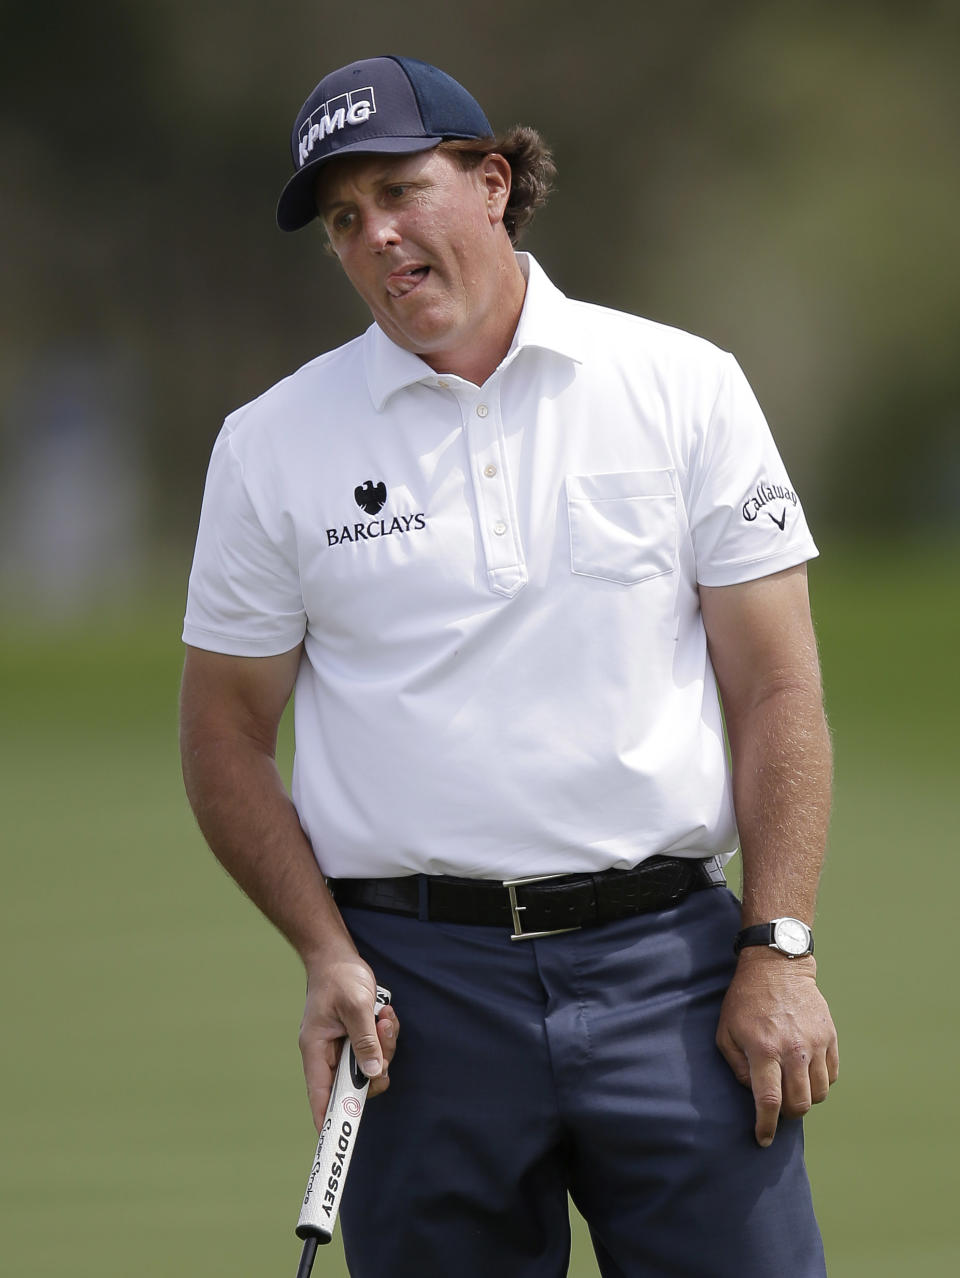 Phil Mickelson reacts as he misses an eagle putt on the 14th hole during the third round of the Texas Open golf tournament, Saturday, March 29, 2014, in San Antonio. Mickelson withdrew from the tournament with a pulled muscle. (AP Photo/Eric Gay)